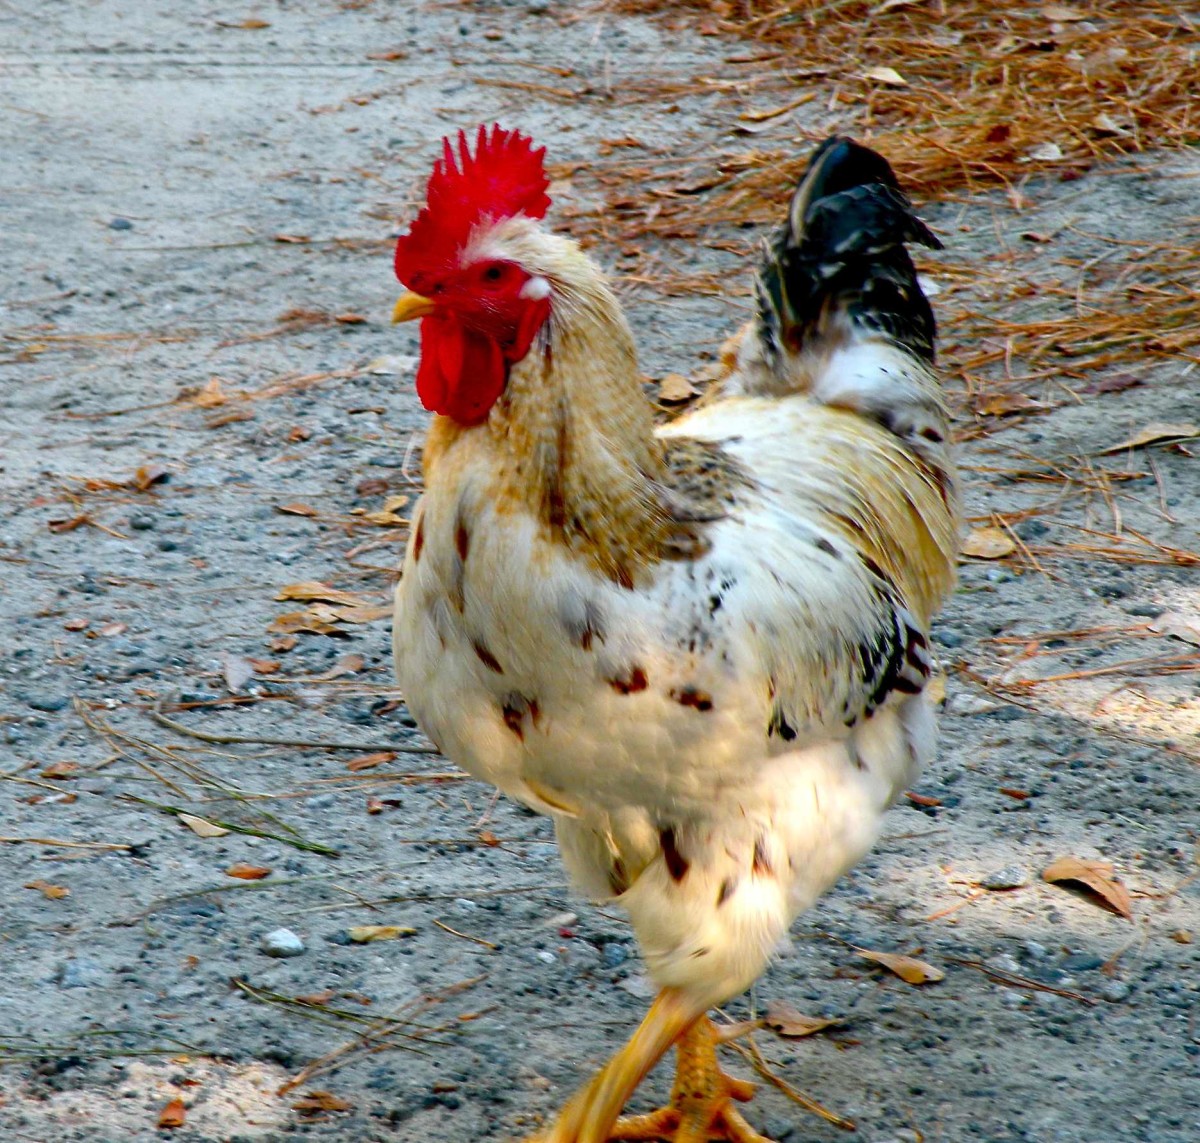 Rooster at the Currituck Beach Lighthouse wanders freely around the parking lot and lawns.